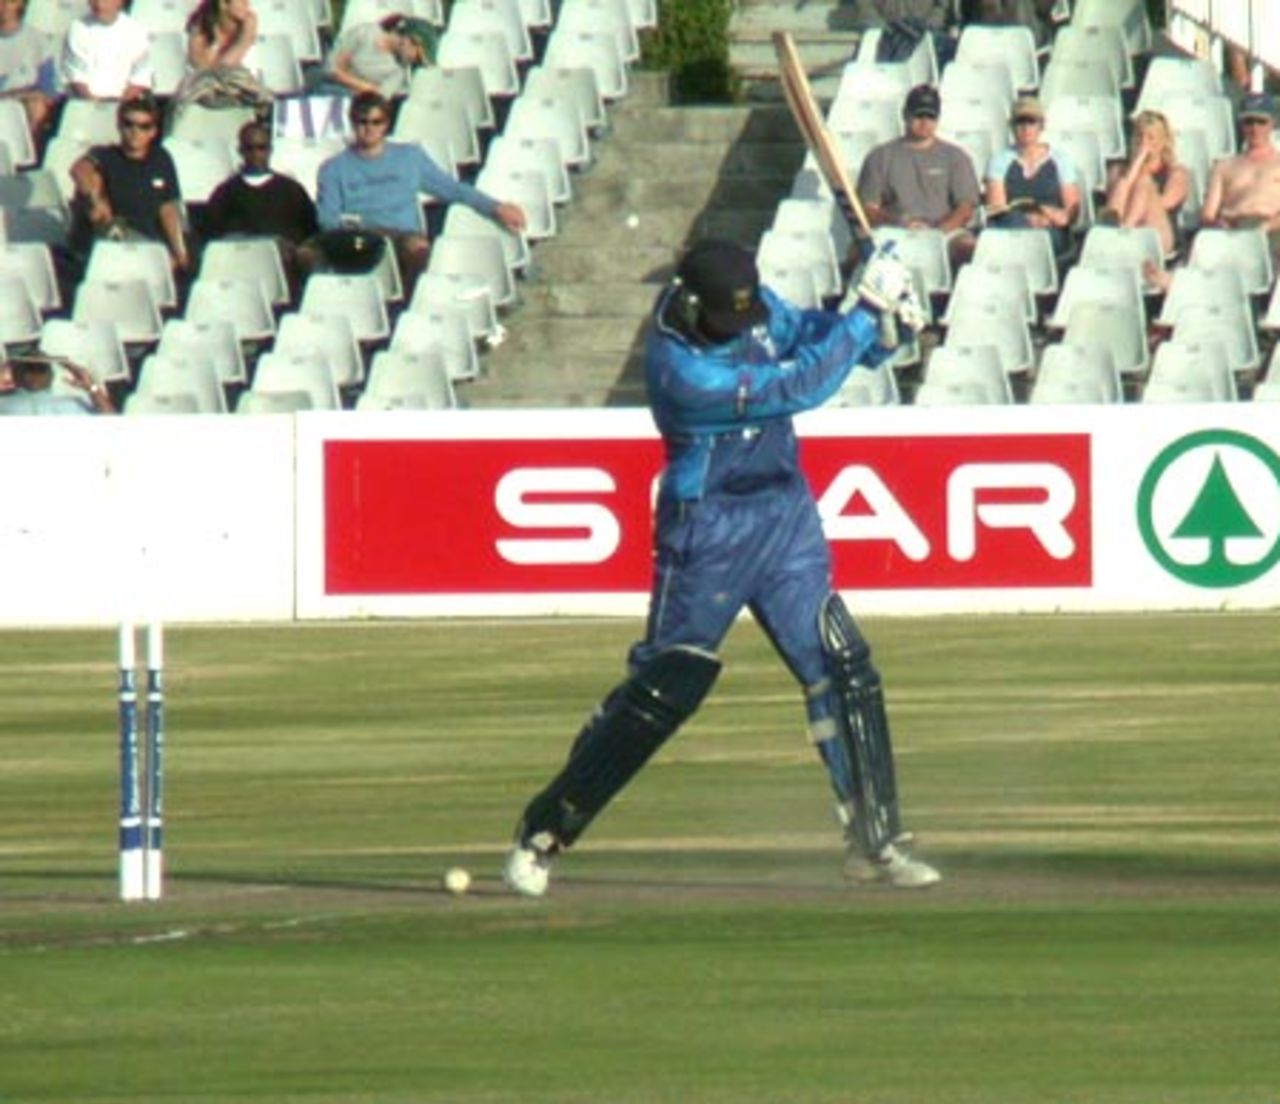 WP's Claude Henderson is cleaned bowled by Deon Kruis